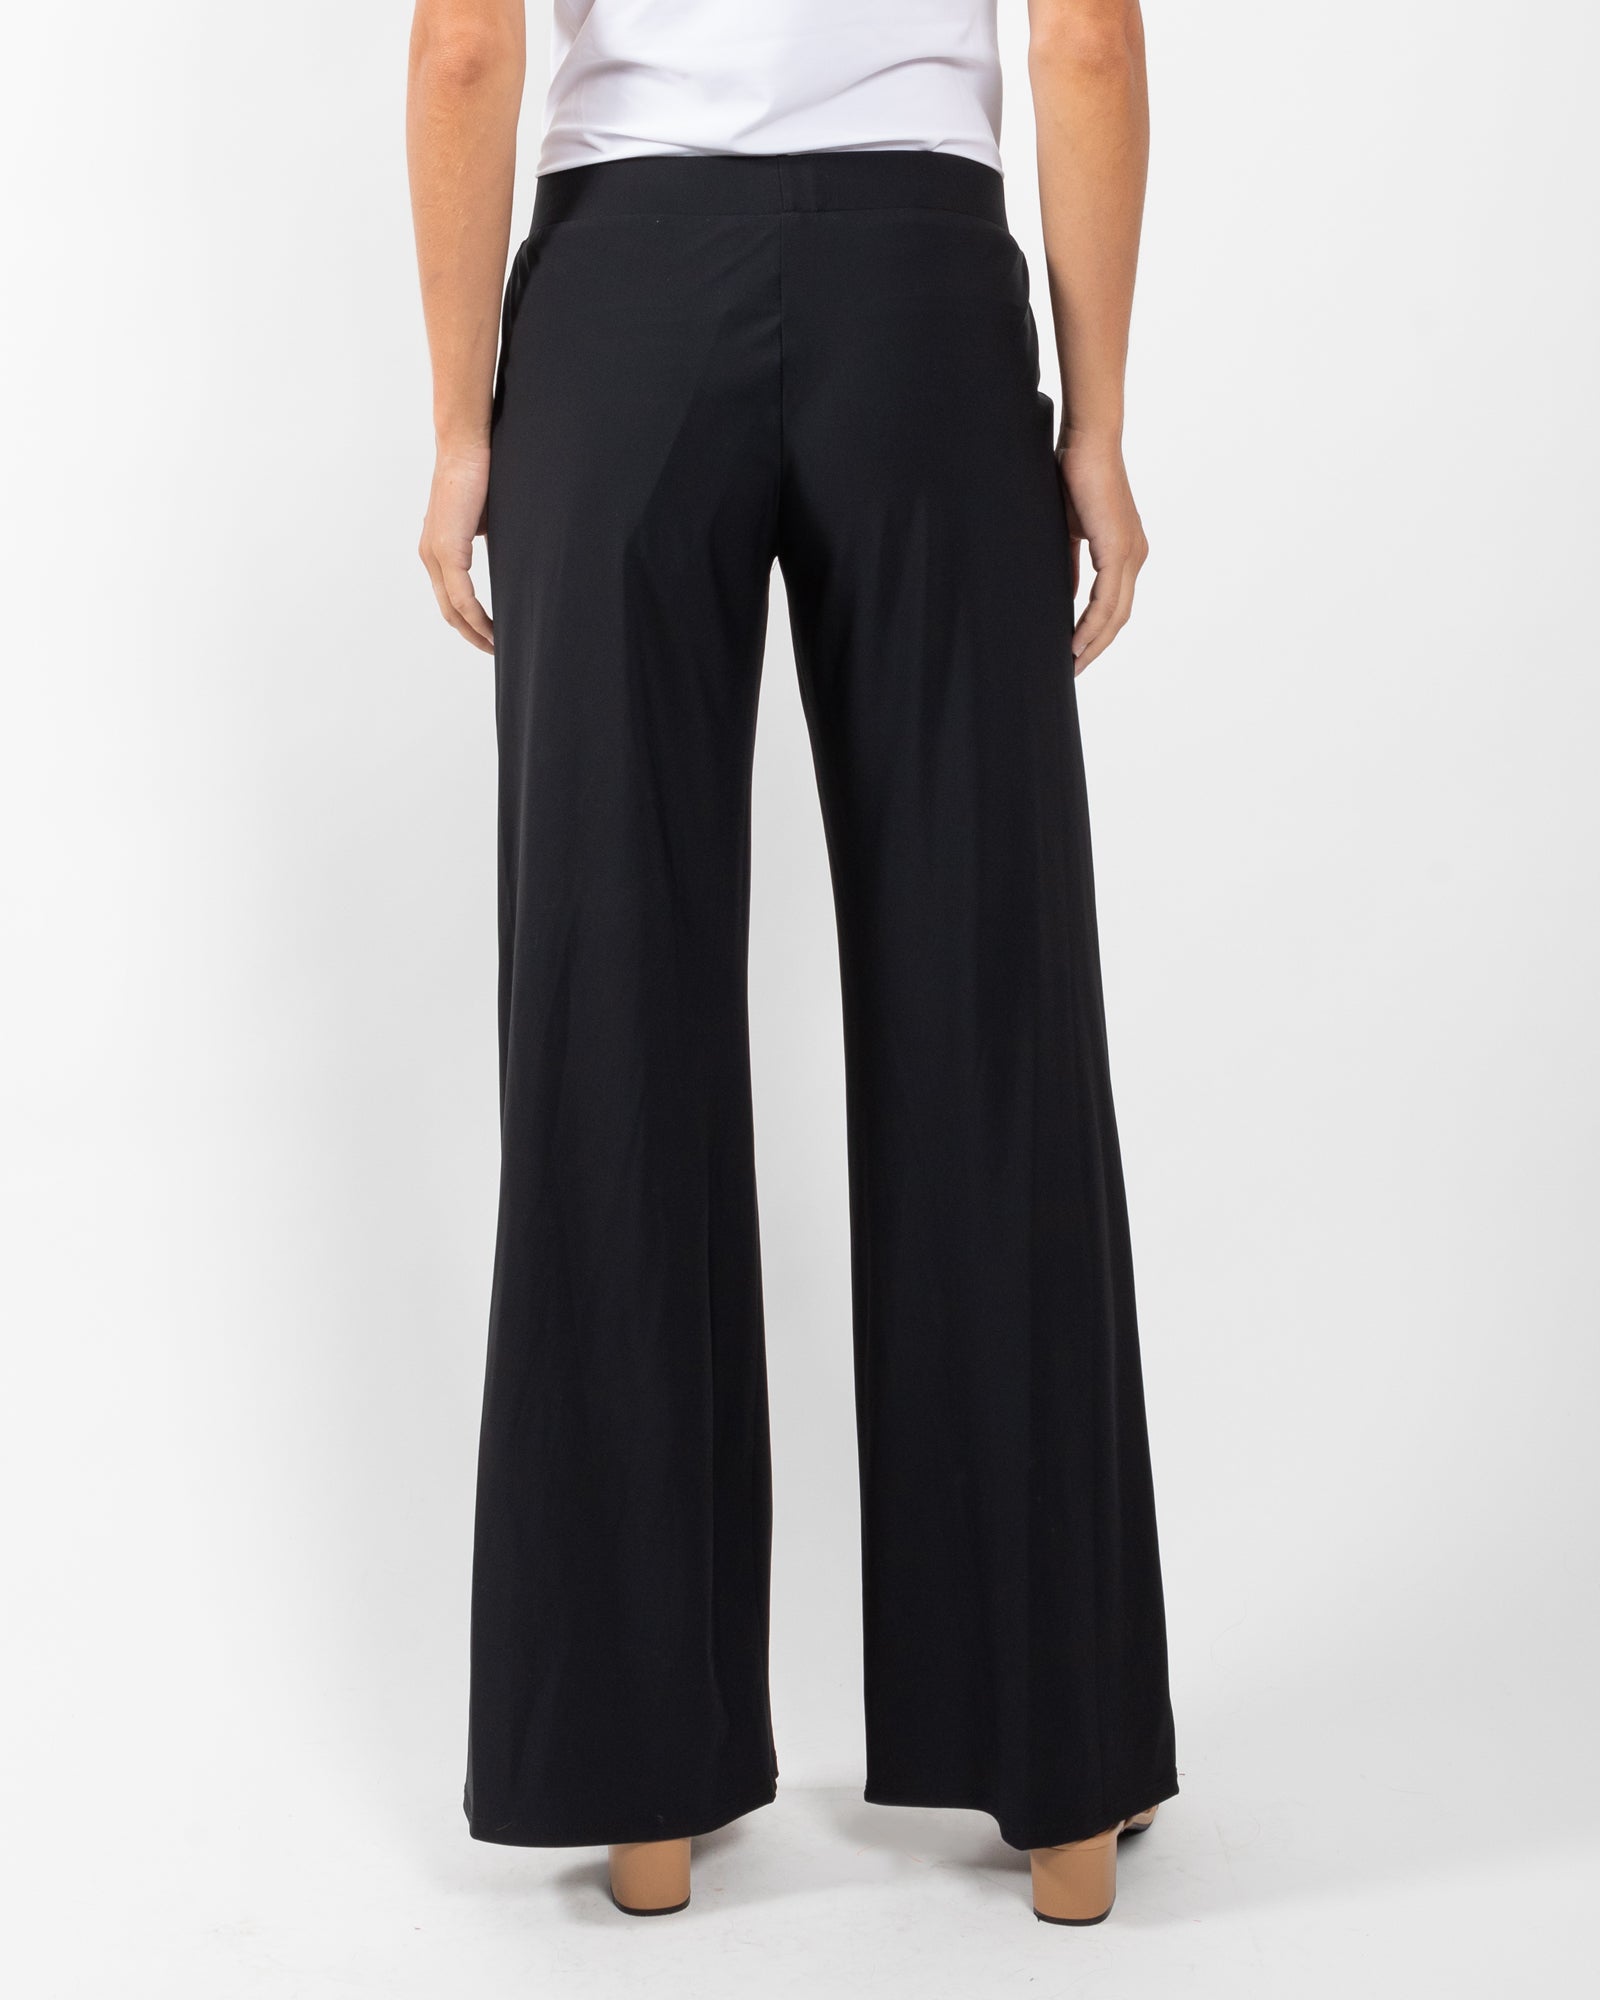 Trixie Pant - Lightweight Jude Cloth